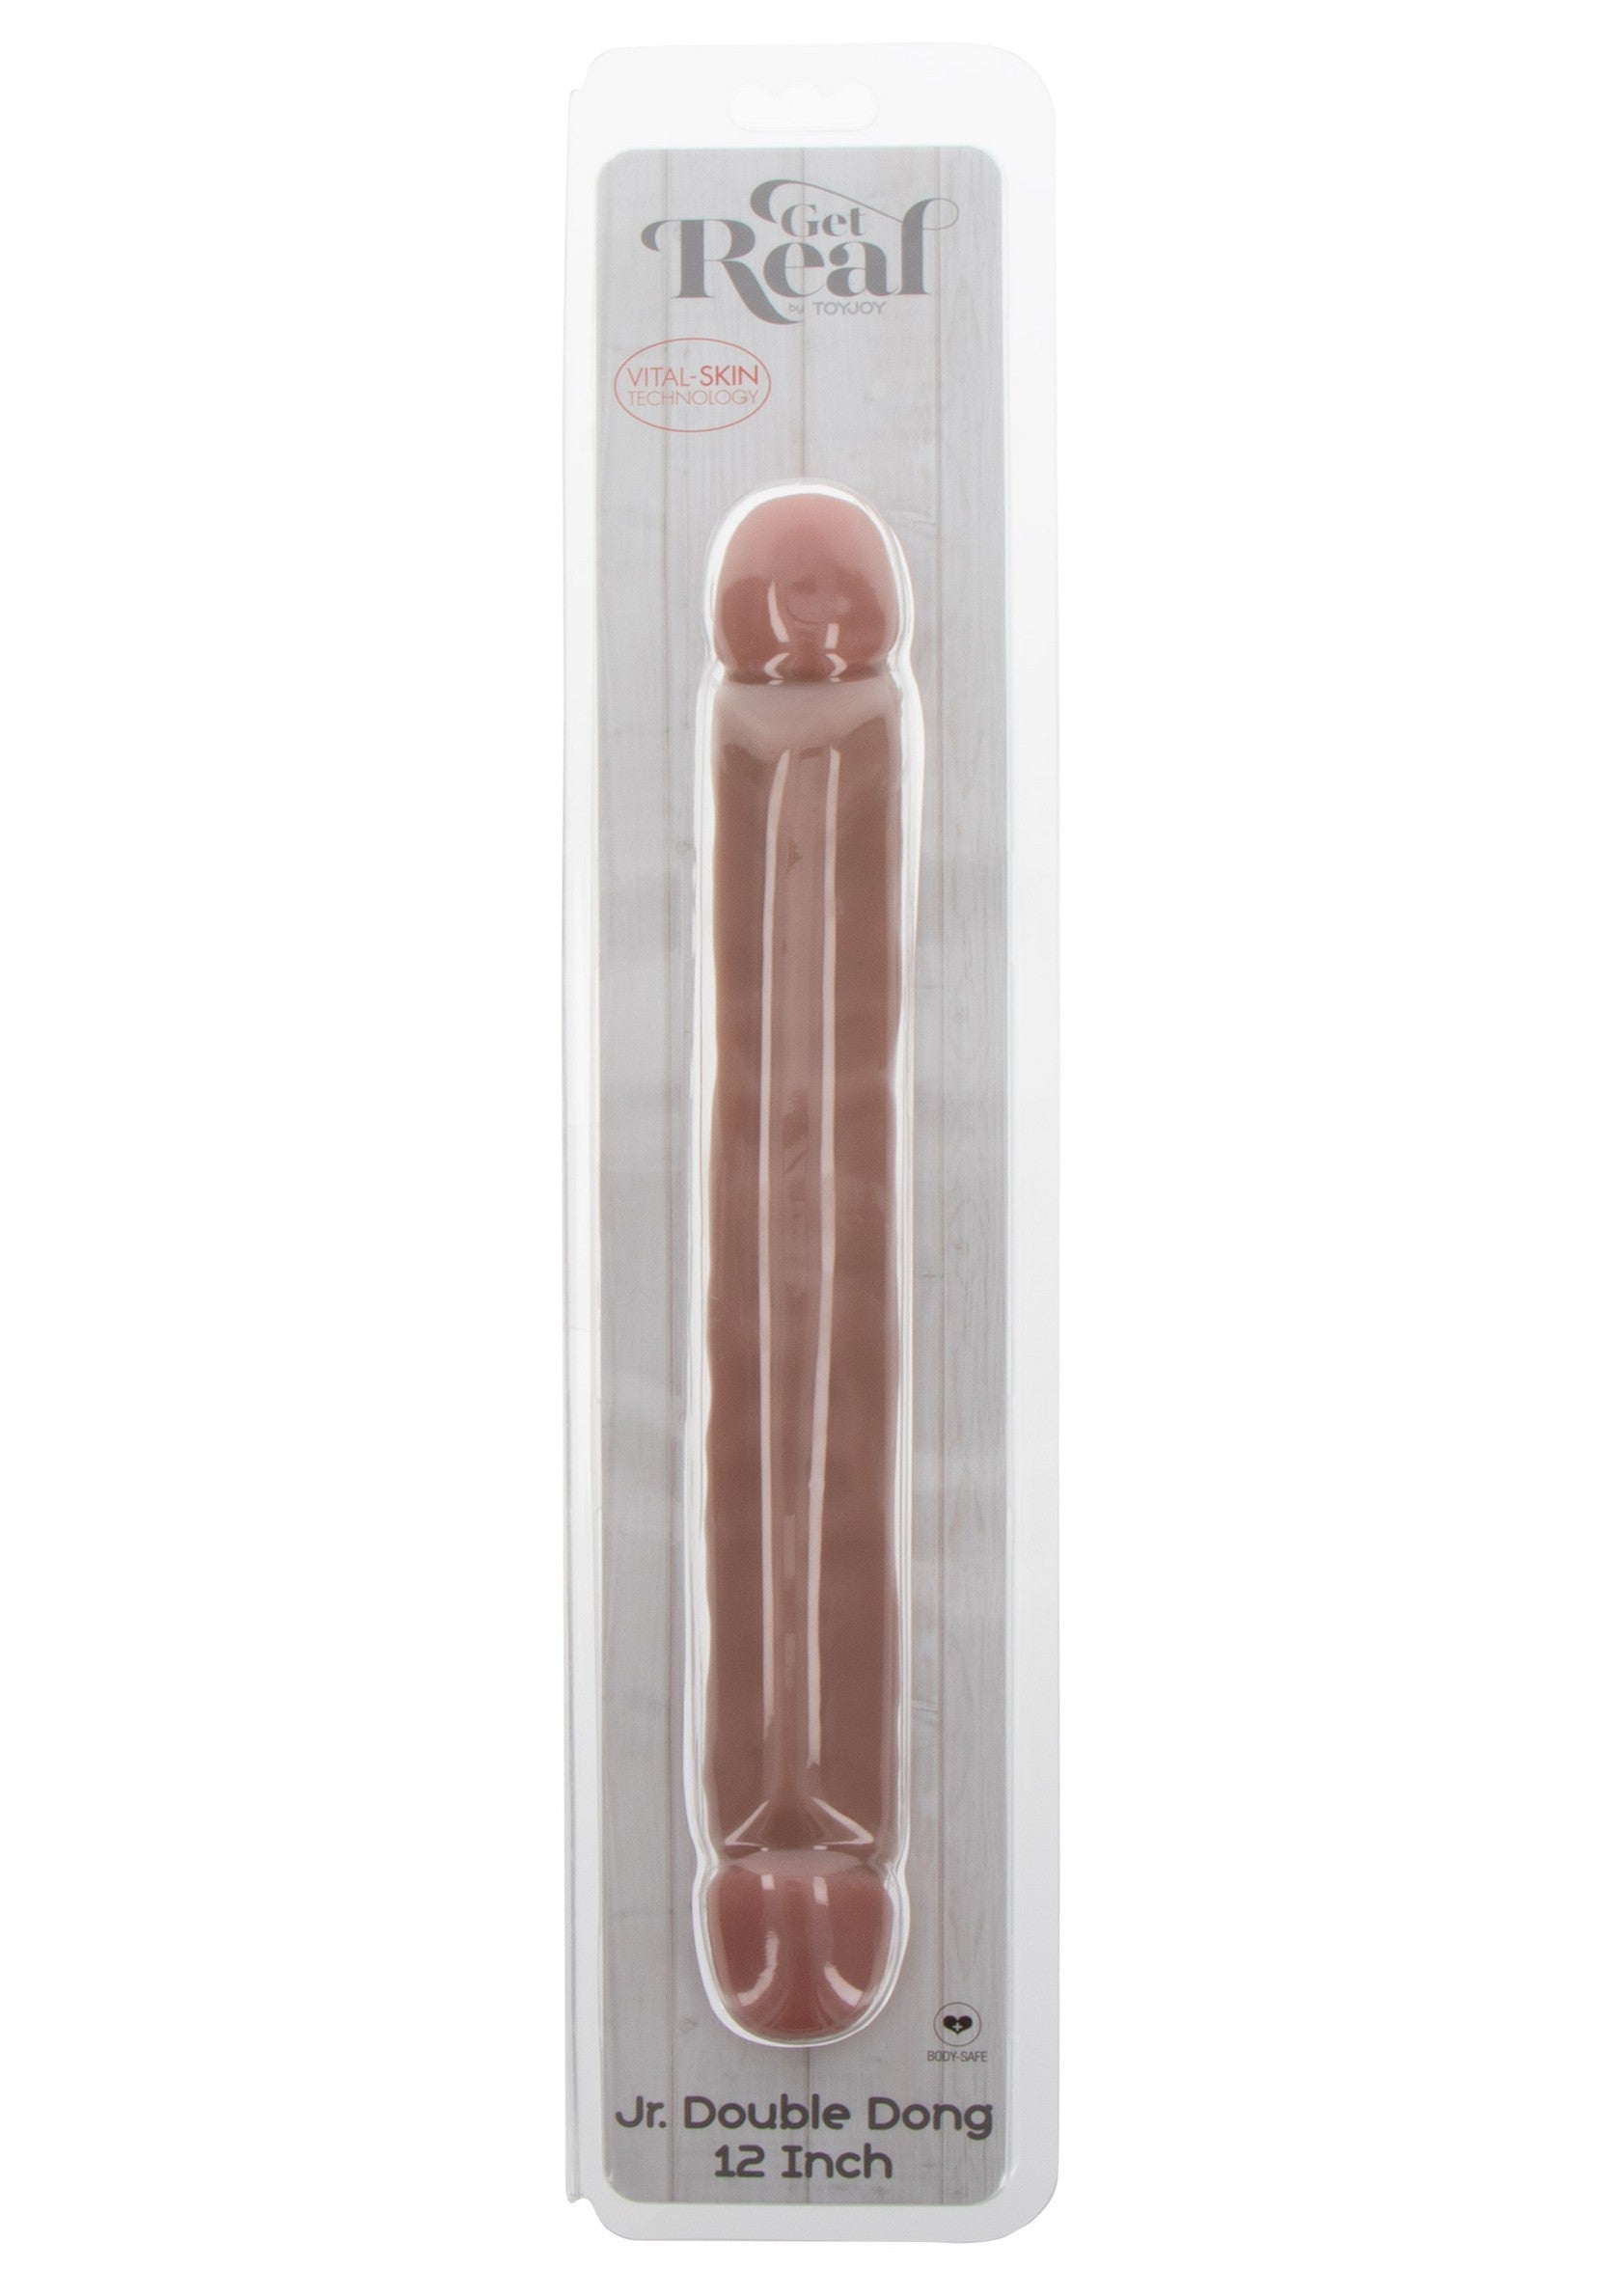 ToyJoy Get Real Junior Double Dong 12' SKIN - 4